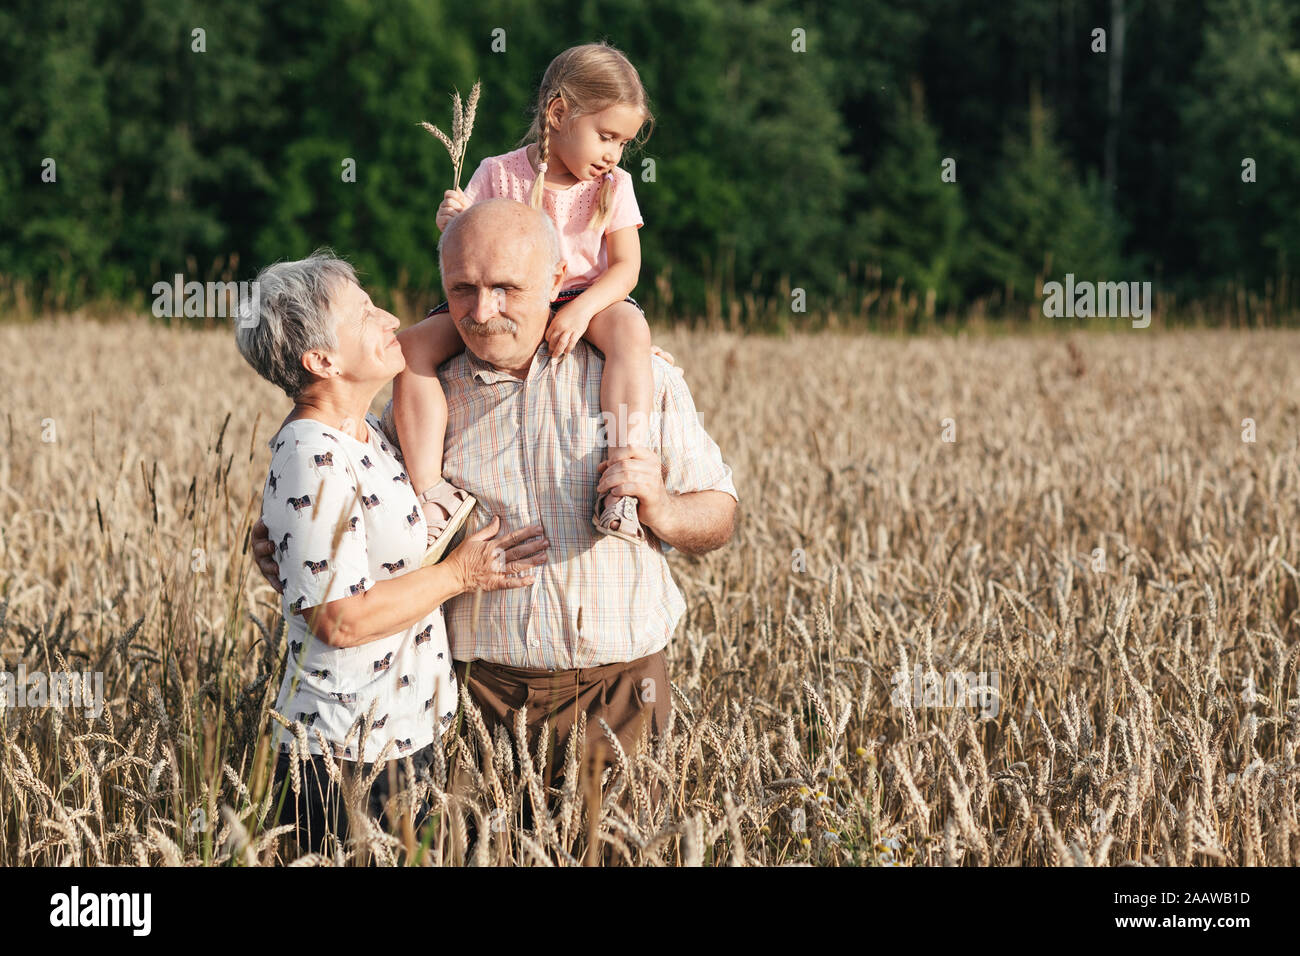 Family portrait of grandparents with their granddaughter in an oat field Stock Photo